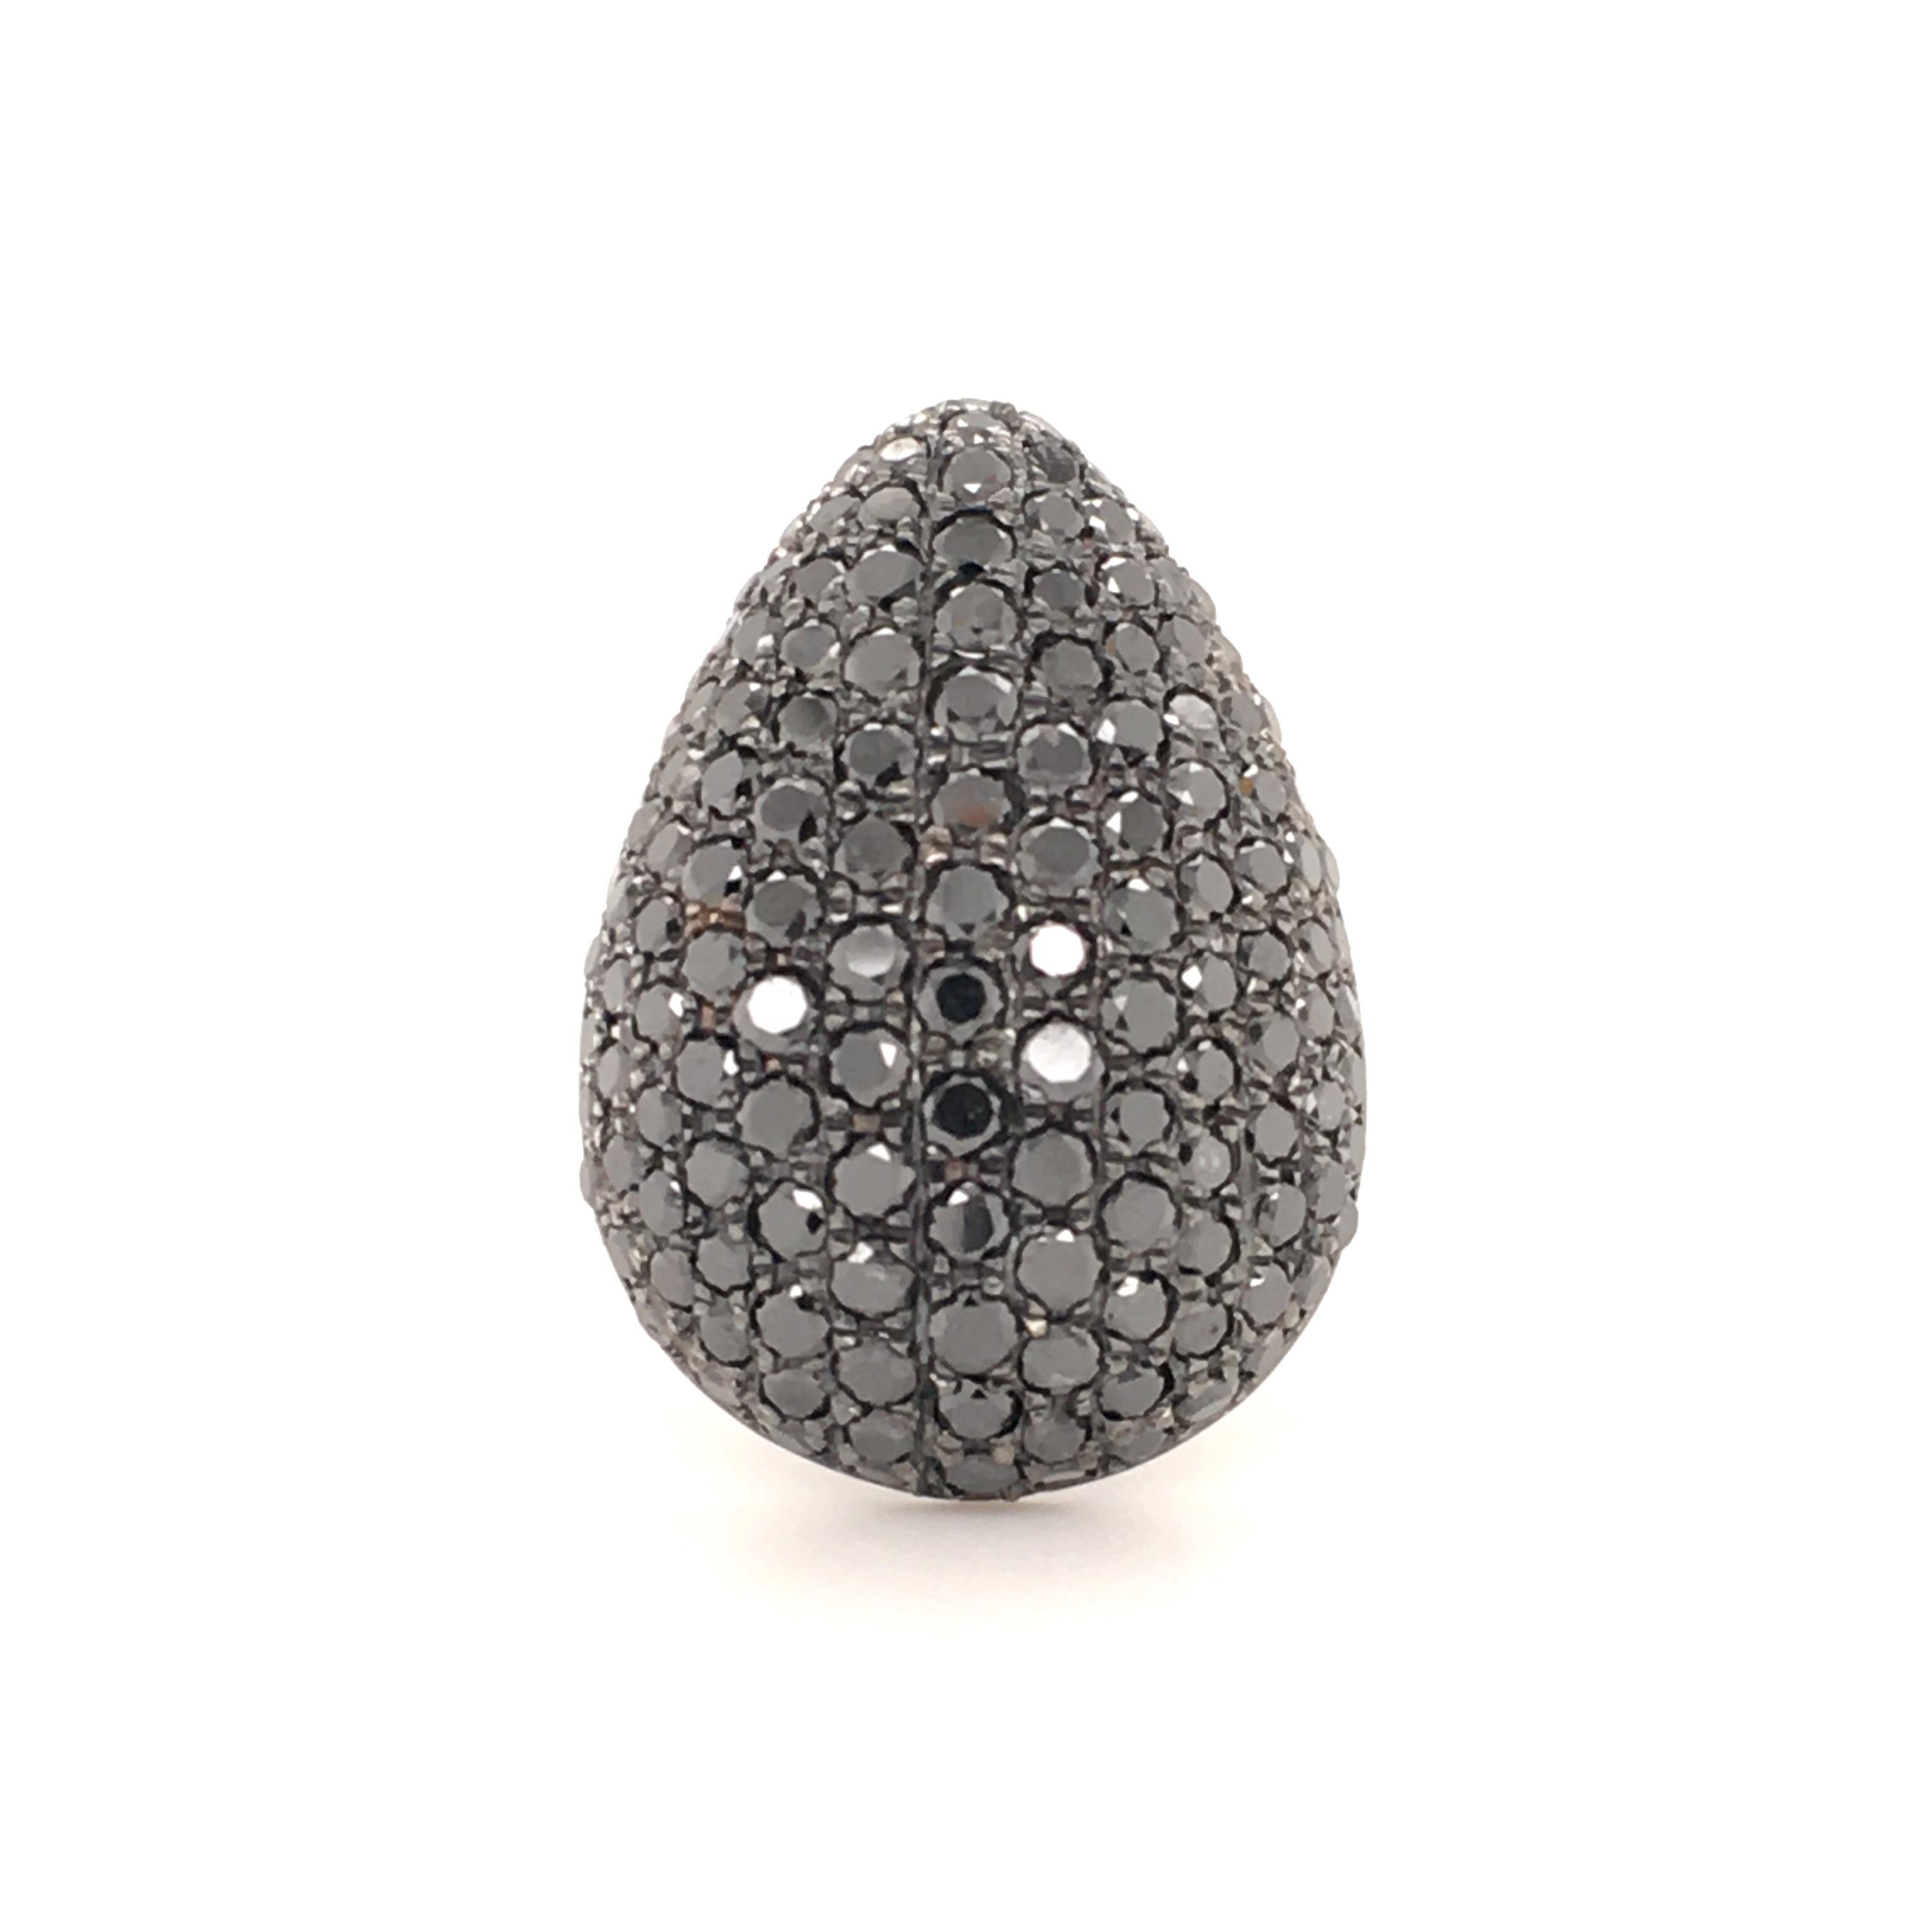 Pear shaped cocktail ring, pavé set with brilliant cut black diamonds, total weight 3.68 carats. Mounting in 18 karat white gold.
The exact diamond weight is engraved in the ring.

Size: 53 Europe / 6.5 US
Maker's mark: AK
Assay mark: 750